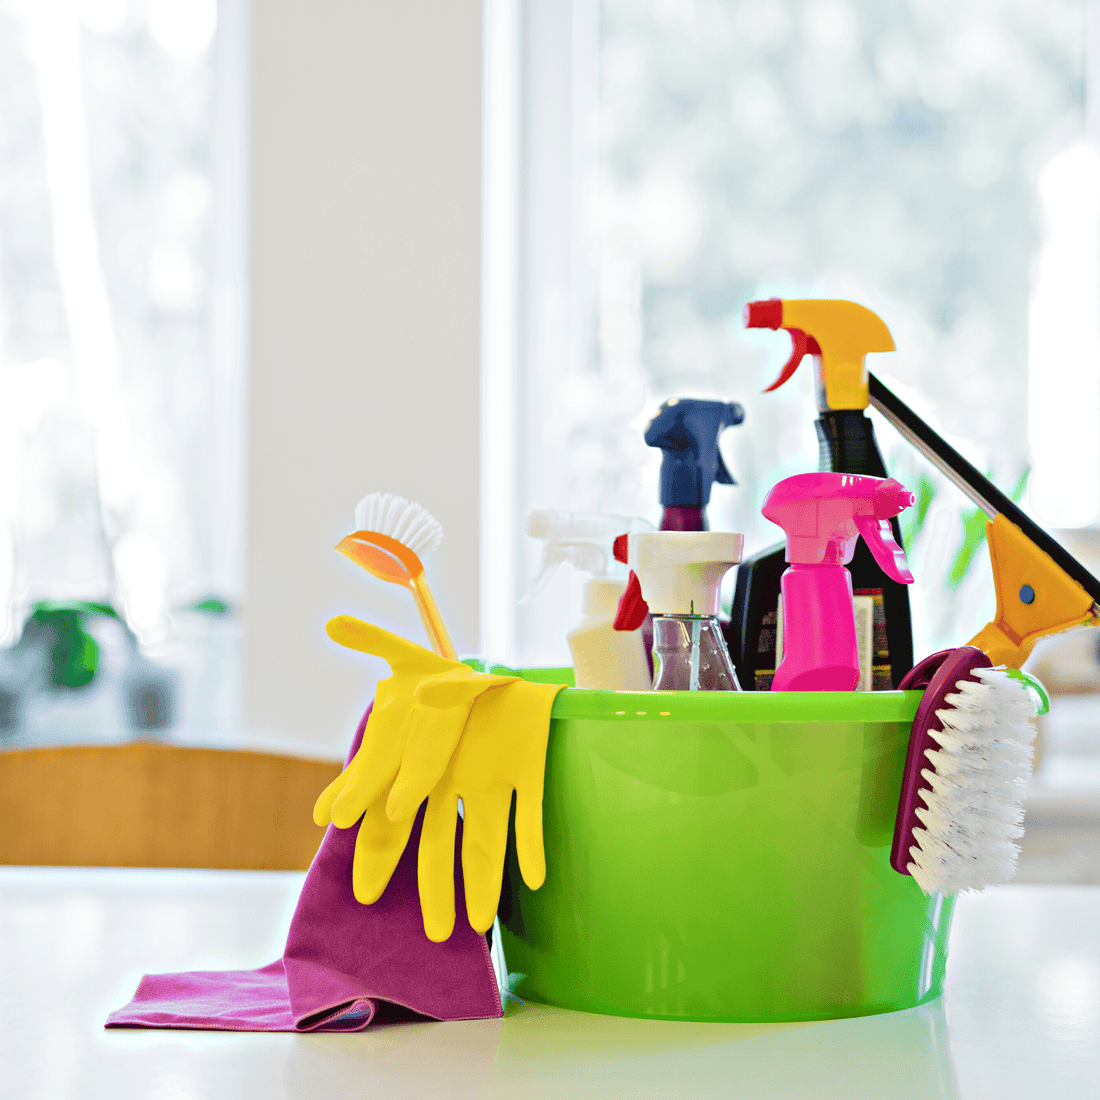 Mixing all cleaning materials is inconvenient for your health.